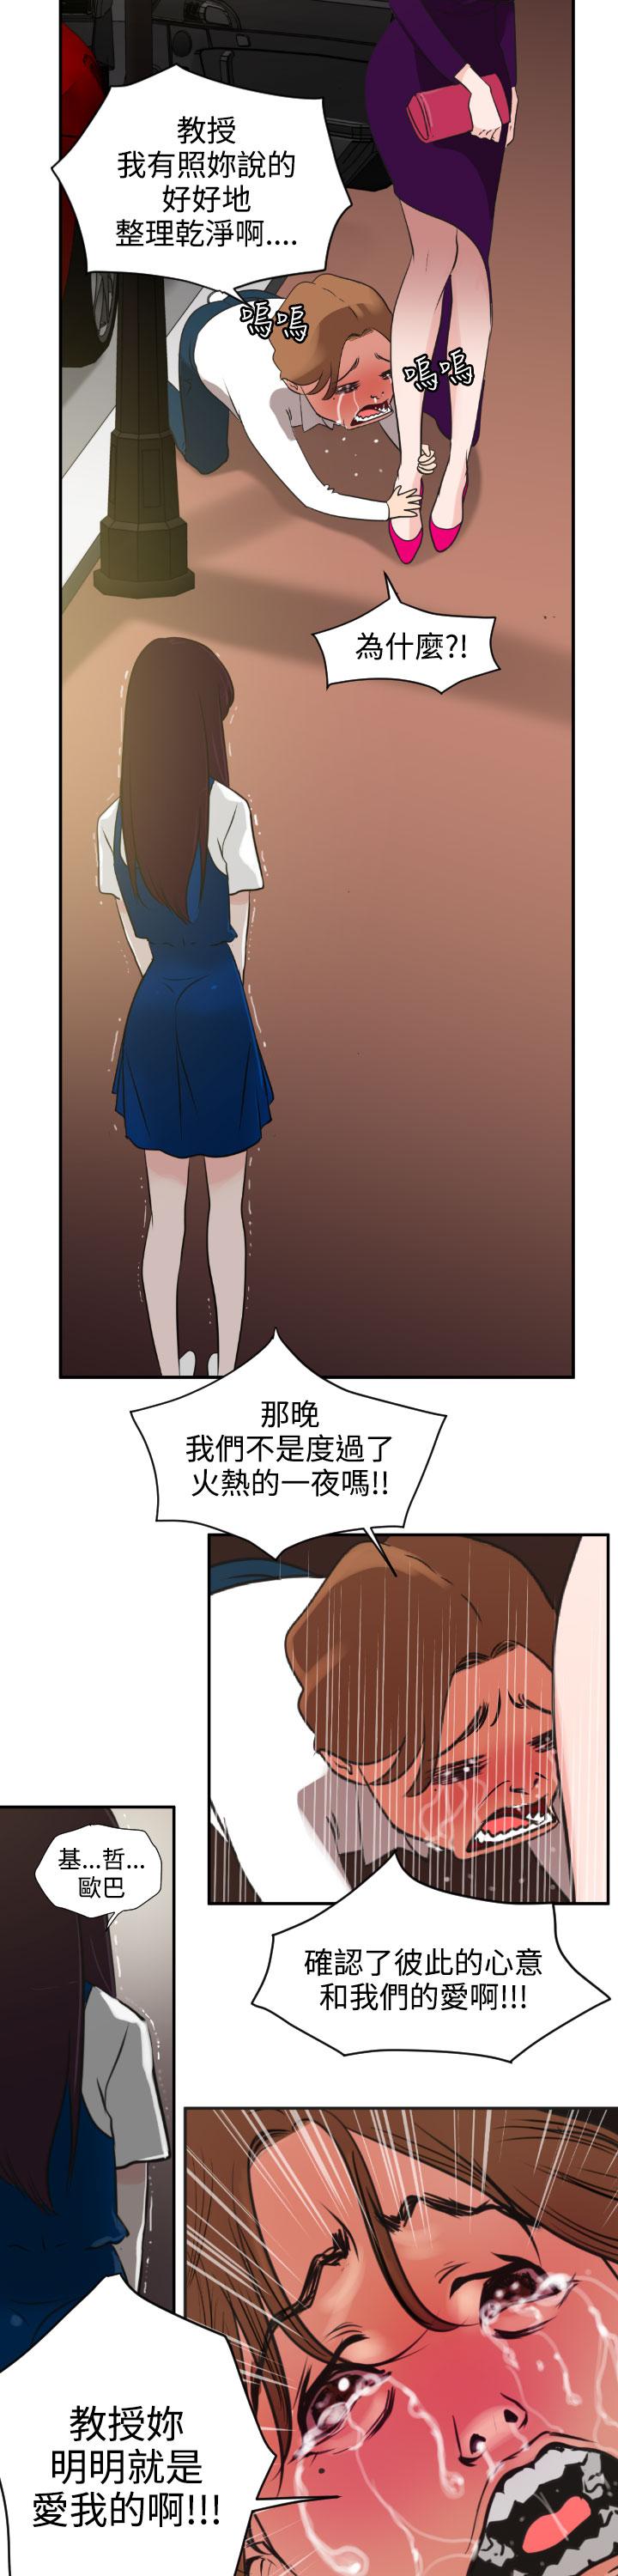 Desire King (慾求王) Ch.1-7 (chinese) 73